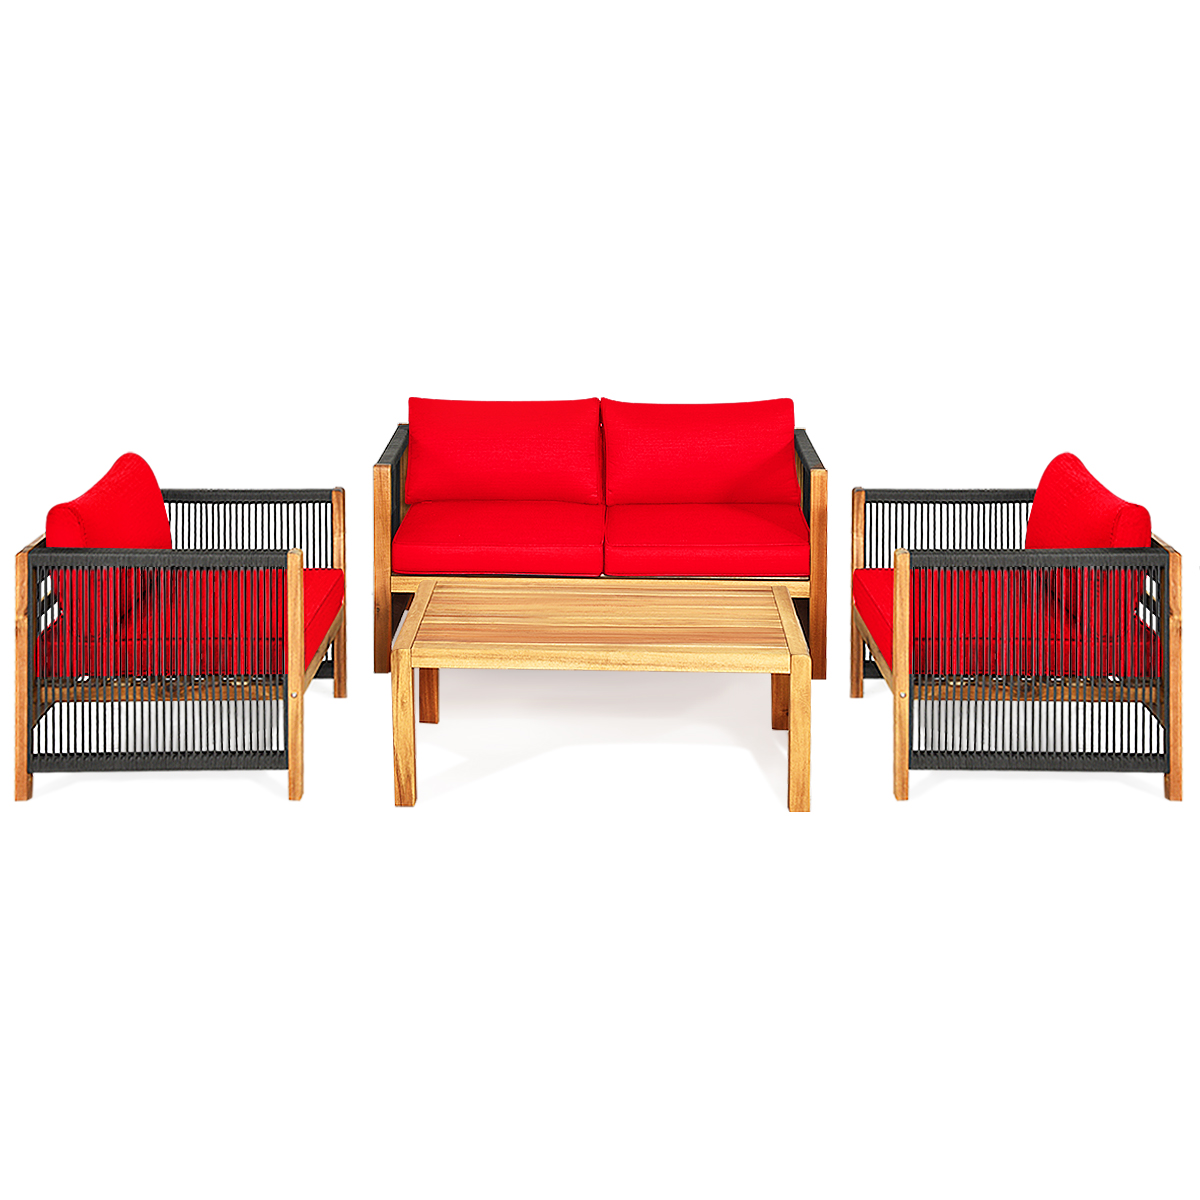 Patiojoy 4-Piece Outdoor Patio Wood Conversation Furniture Set Padded Chair with Coffee Table Red - image 1 of 4